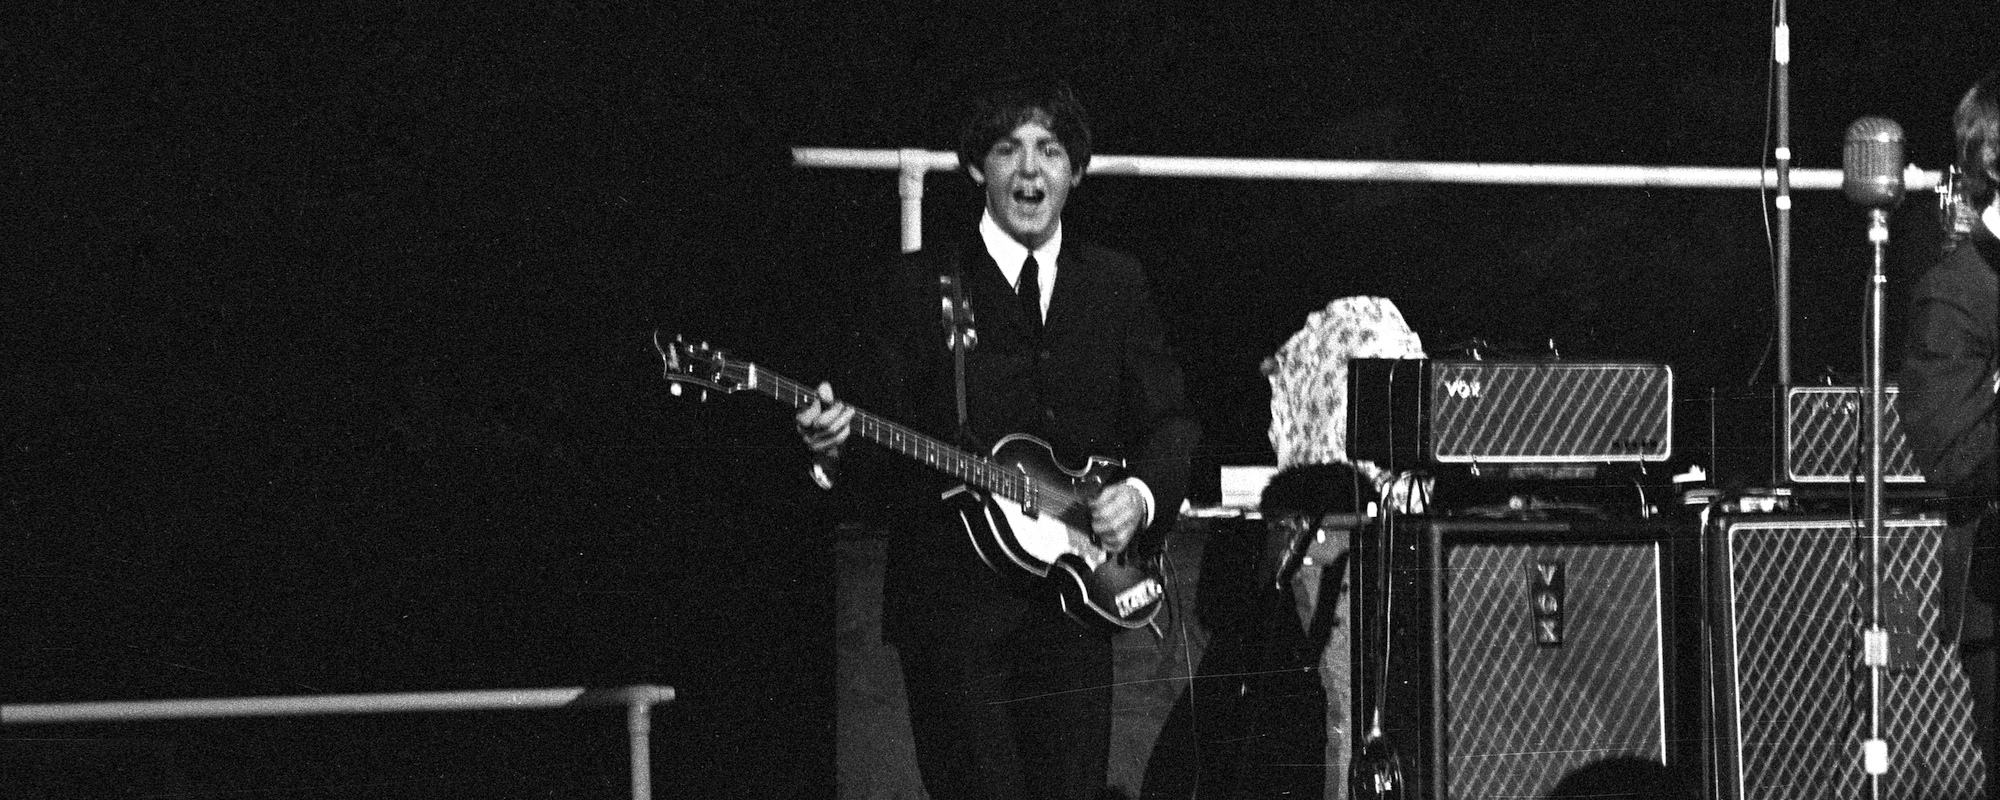 TikTok welcomes dozens of The Beatles' songs, including 'Hey Jude' and 'Let  It Be